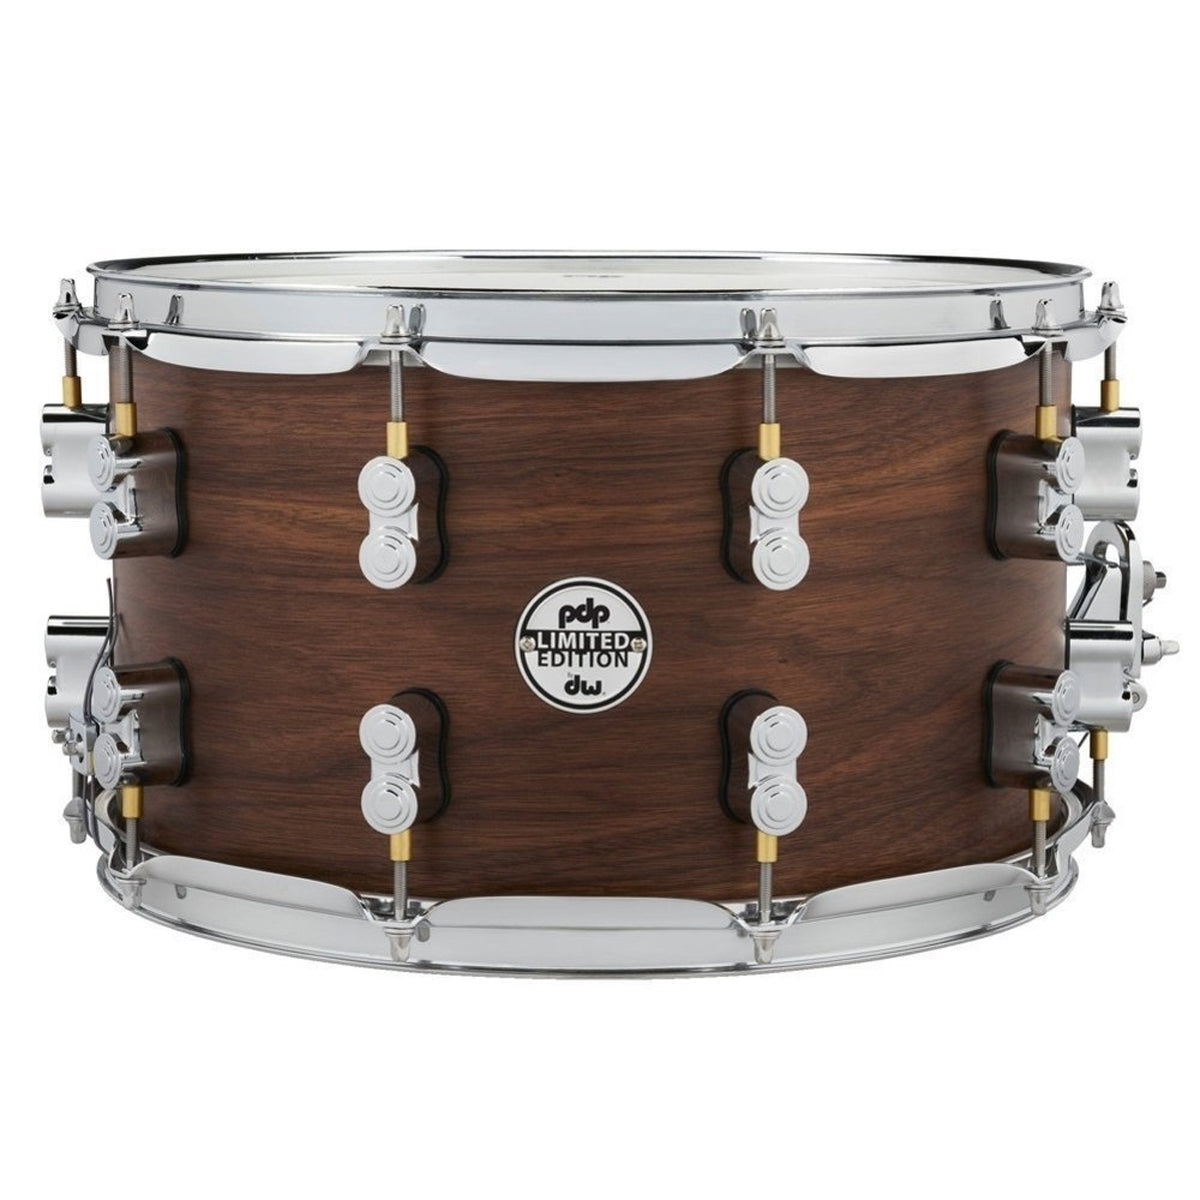 PDP by DW Ltd Edition 14"x8" Maple/Walnut Snare Drum